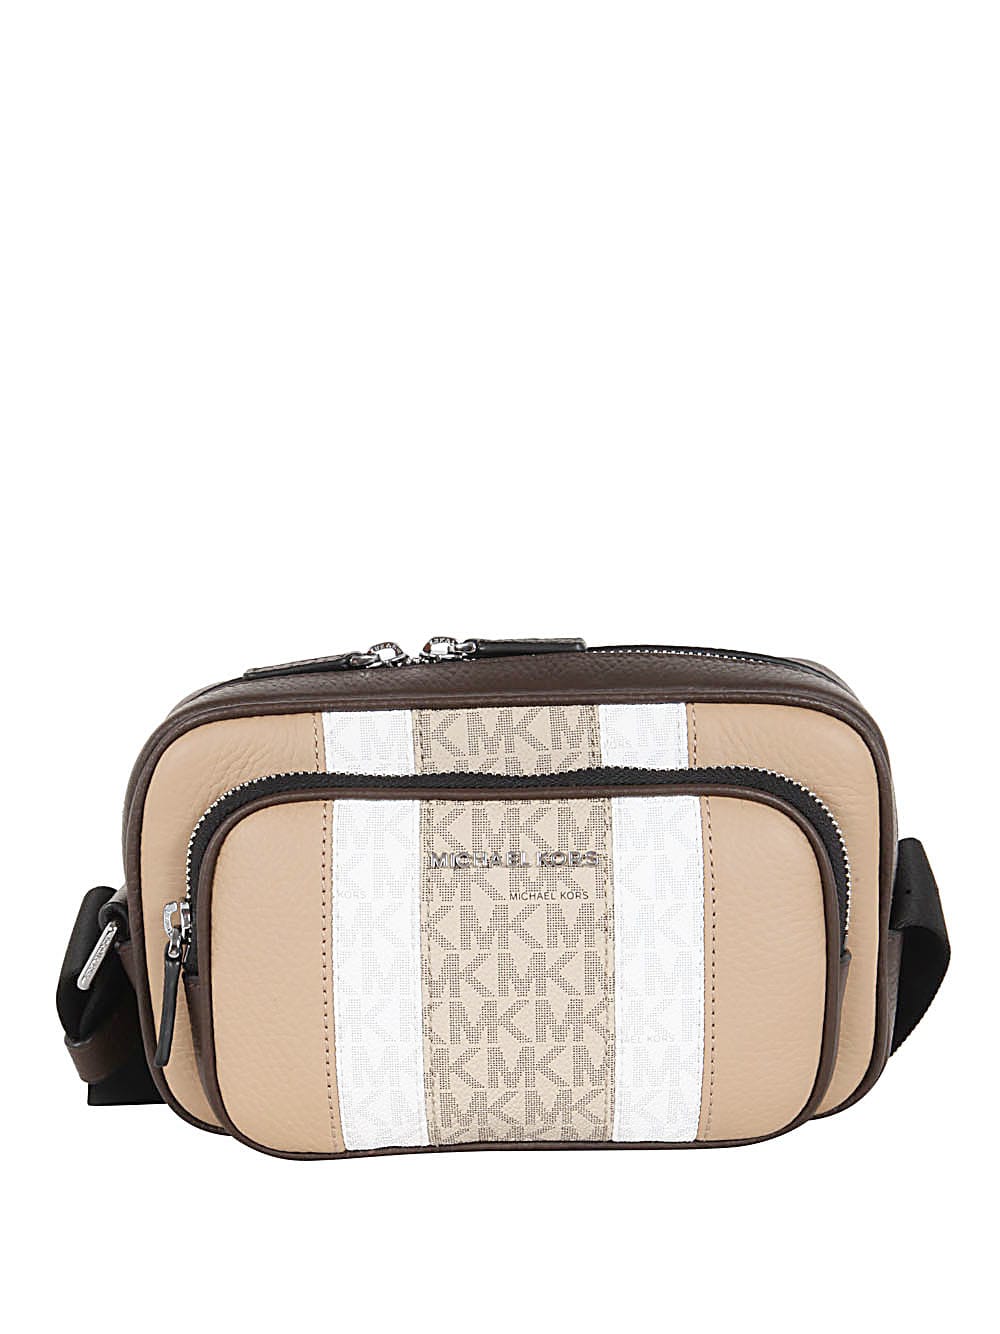 Michael Kors Camera Bag With Pouch